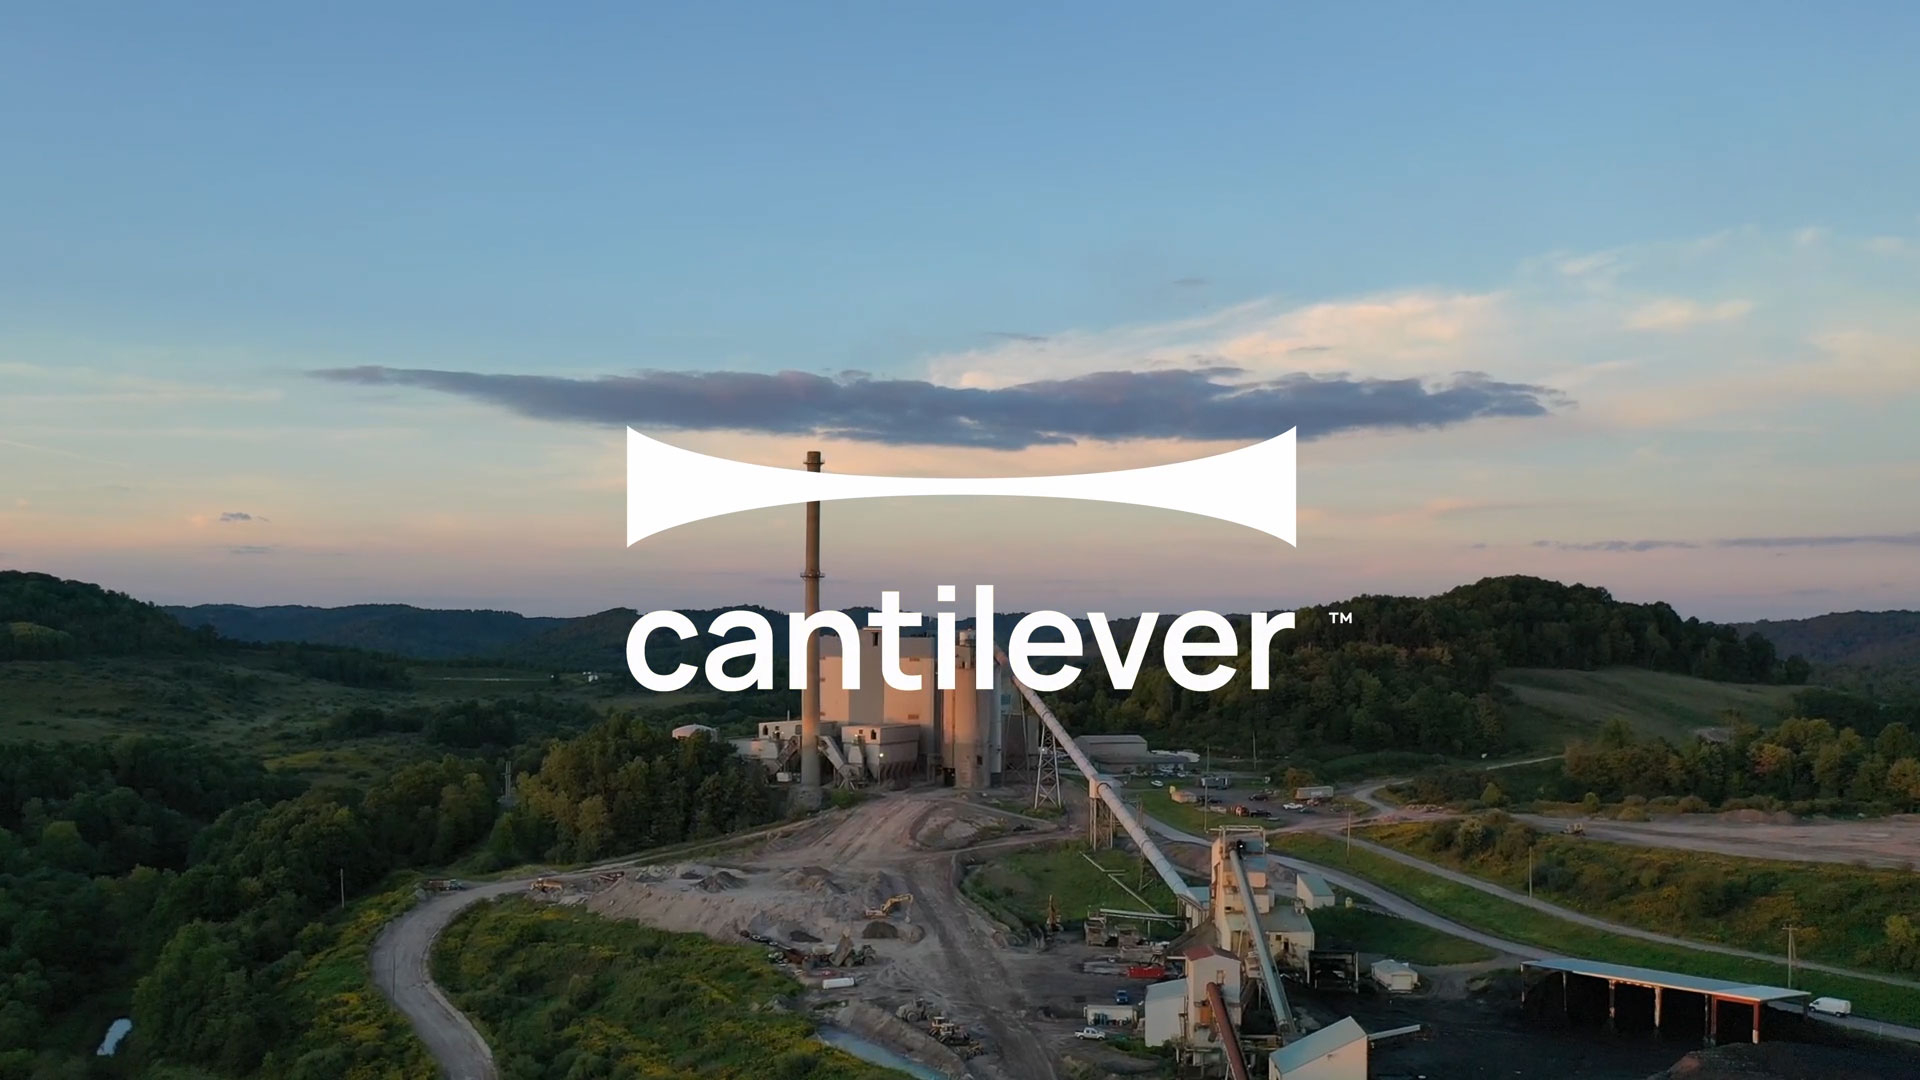 Cantilever is Gecko Robotics' AI-driven solution integrating robotic inspections, data analytics, and user tools to optimize decision making in asset health and management.